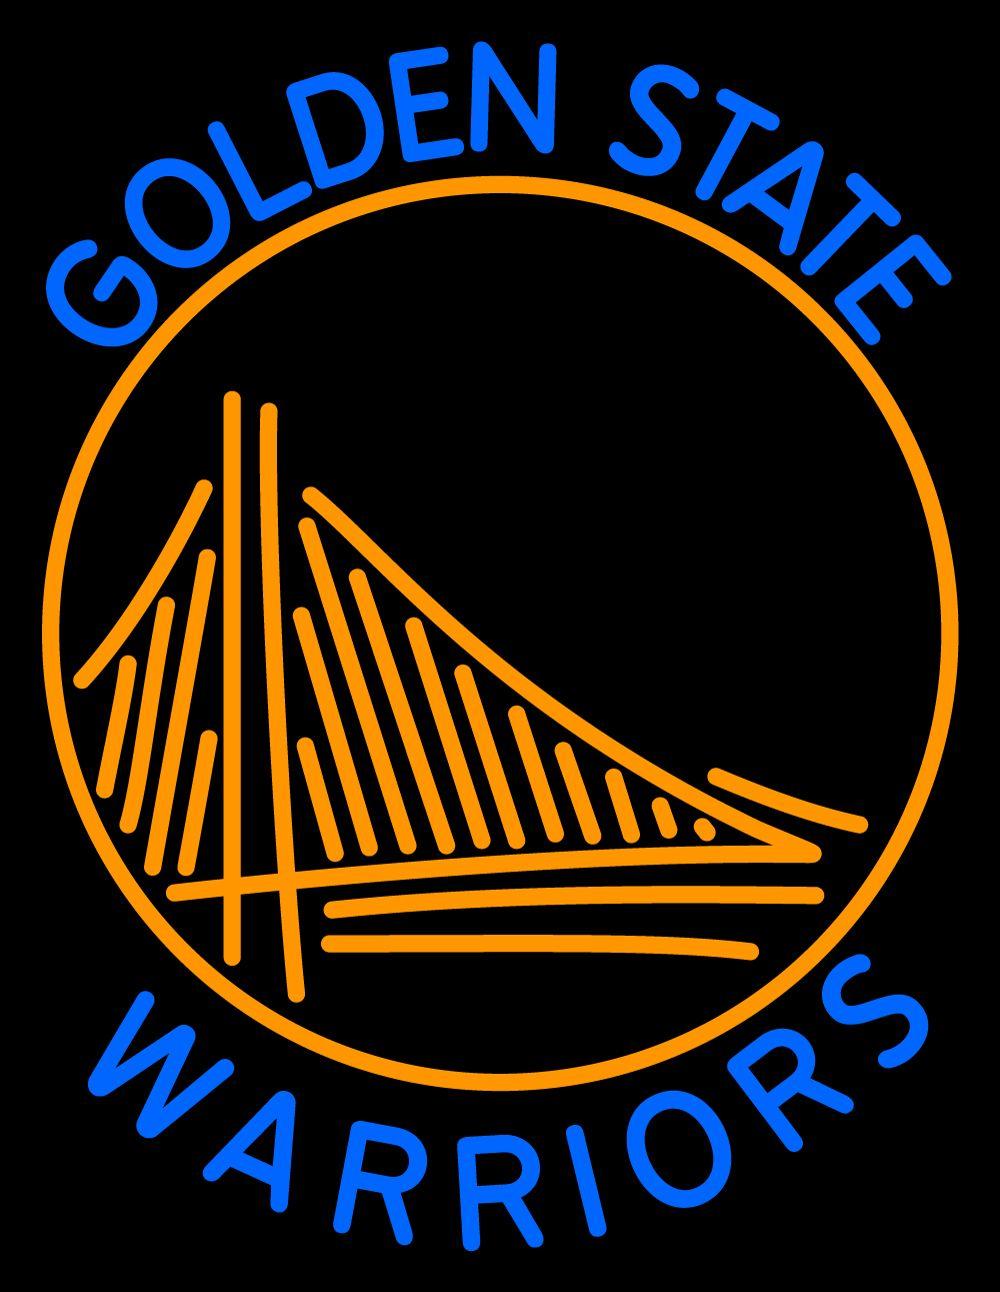 Cool Golden State Warriors Wallpapers